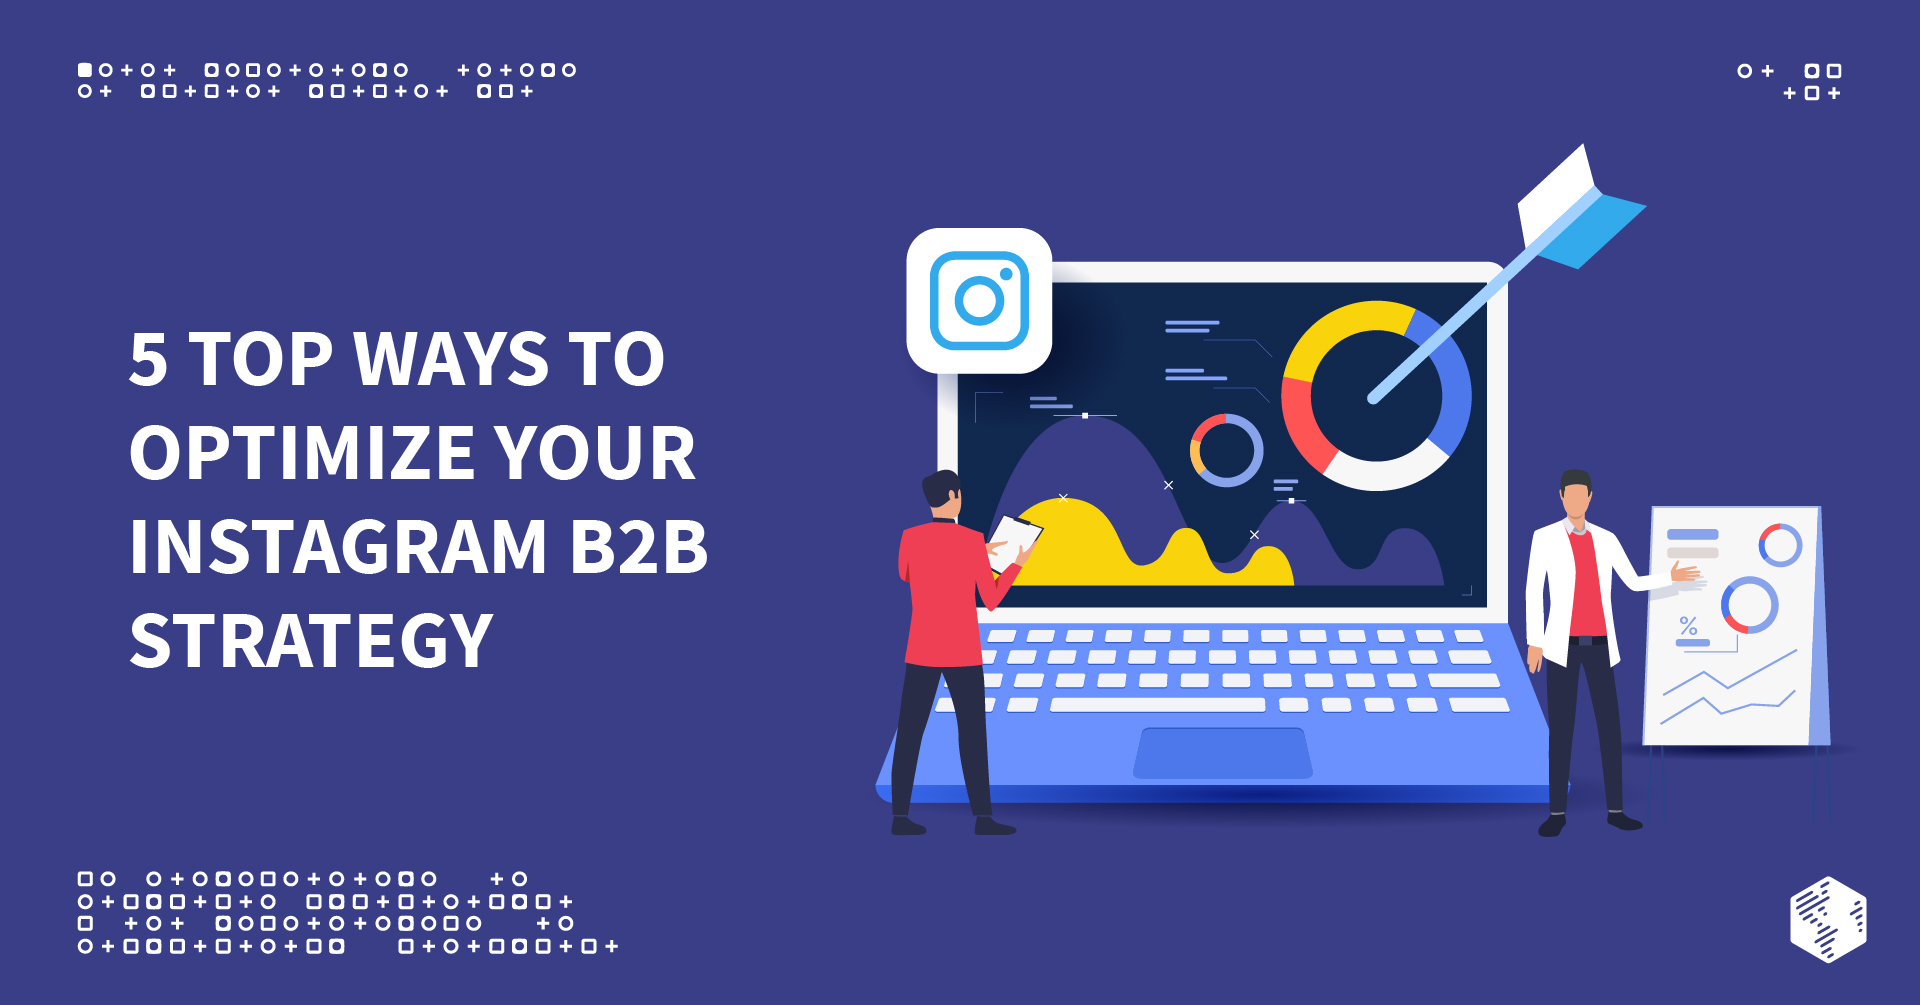 5 Top Ways To Optimize Your Instagram B2B Strategy